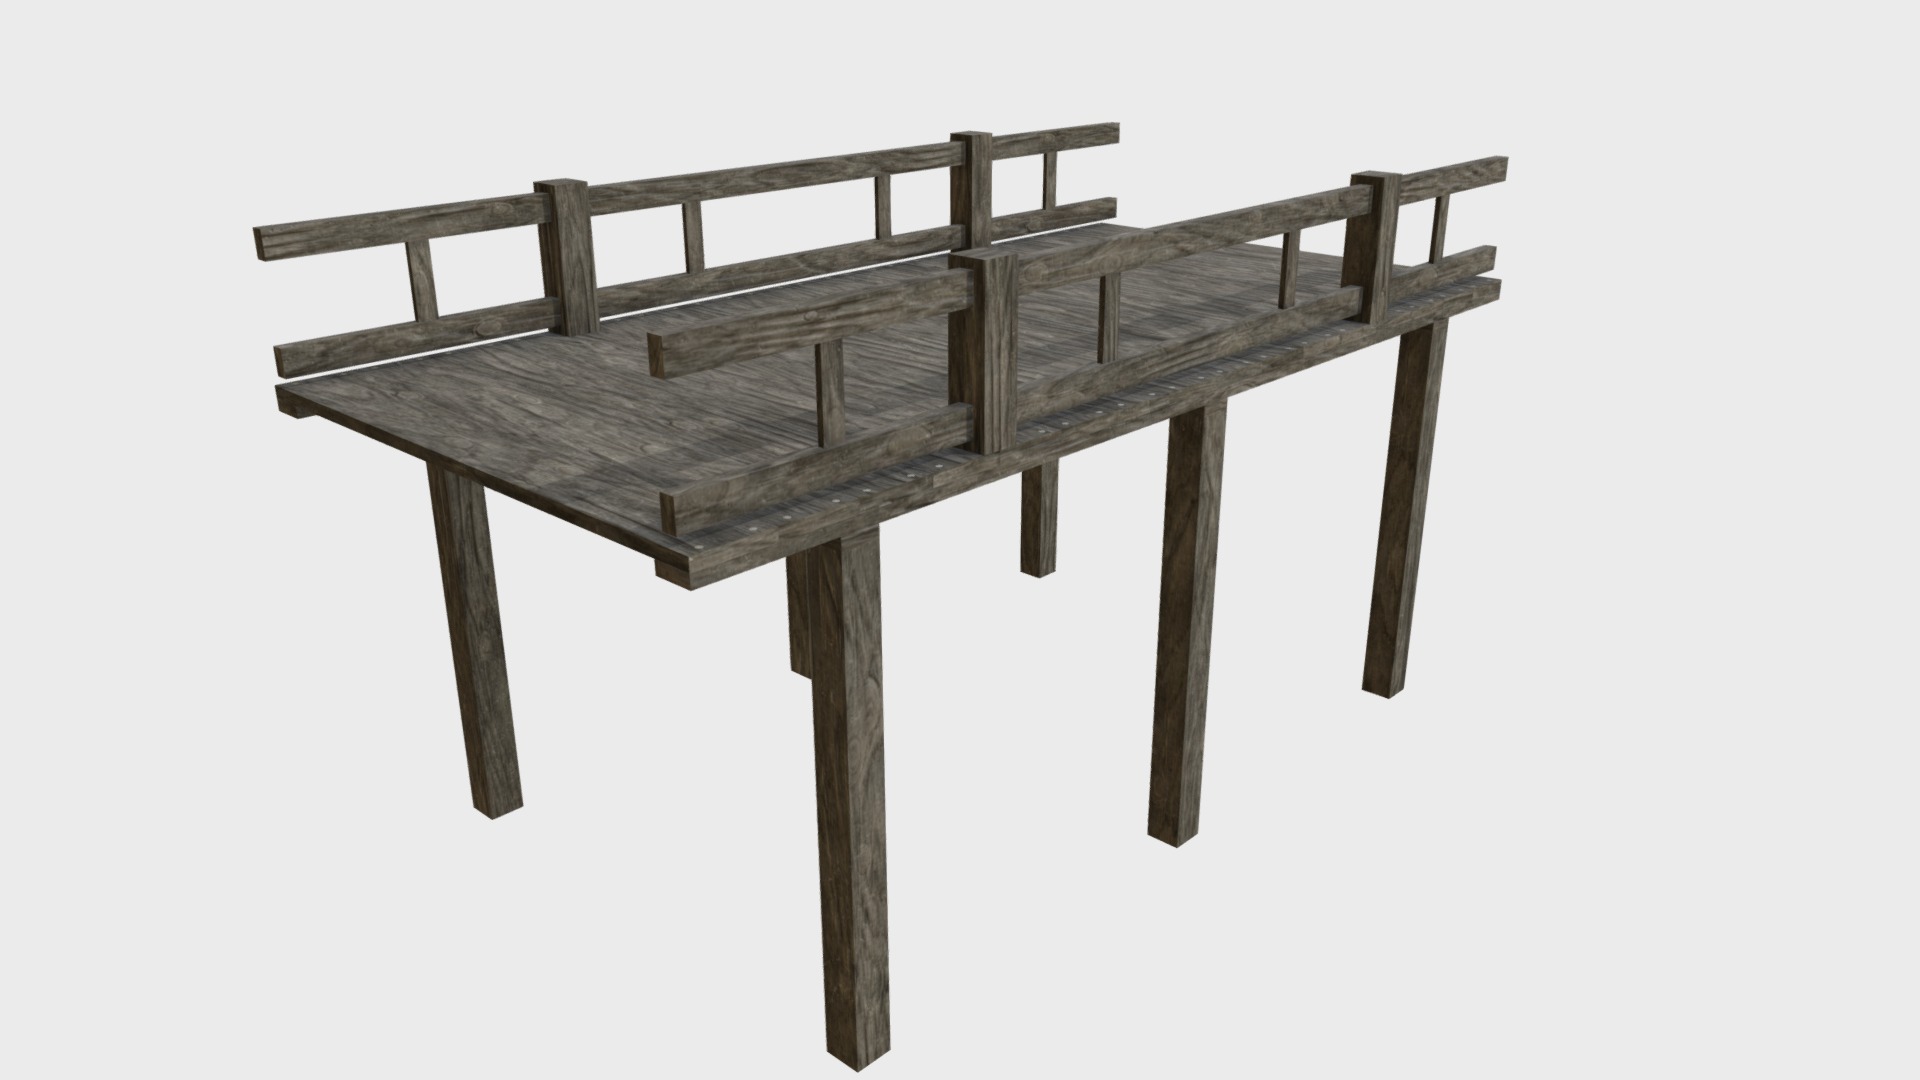 3D model Wooden pier with railing - This is a 3D model of the Wooden pier with railing. The 3D model is about a wooden table with legs.